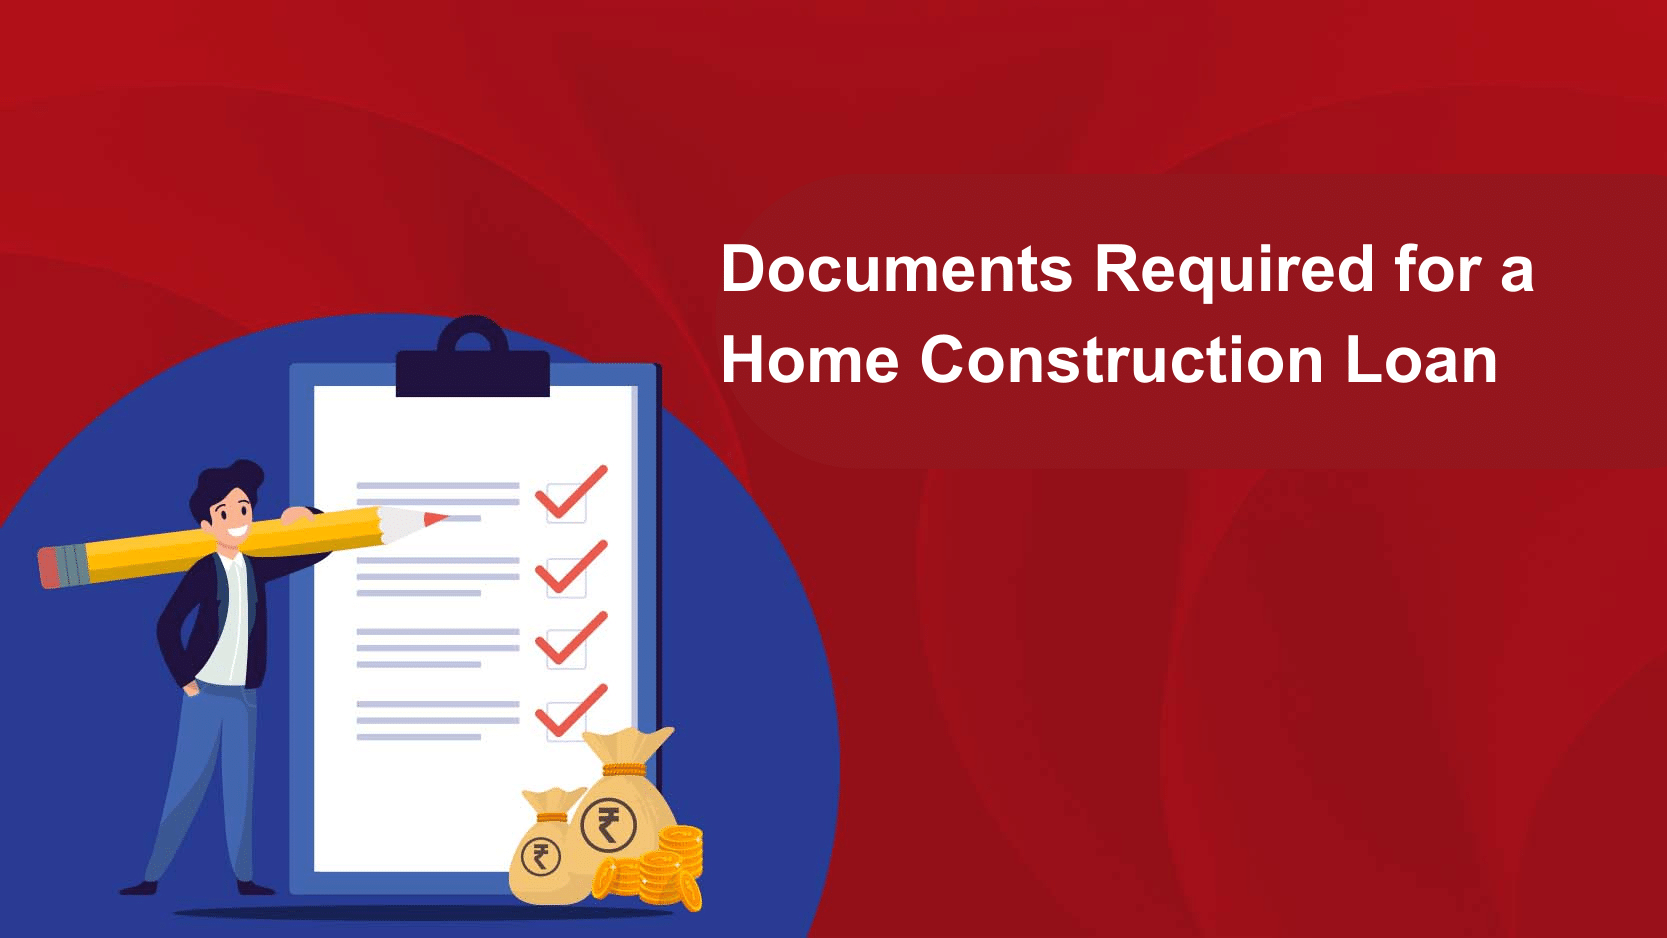 What documents are required to apply for a Home Construction Loan?